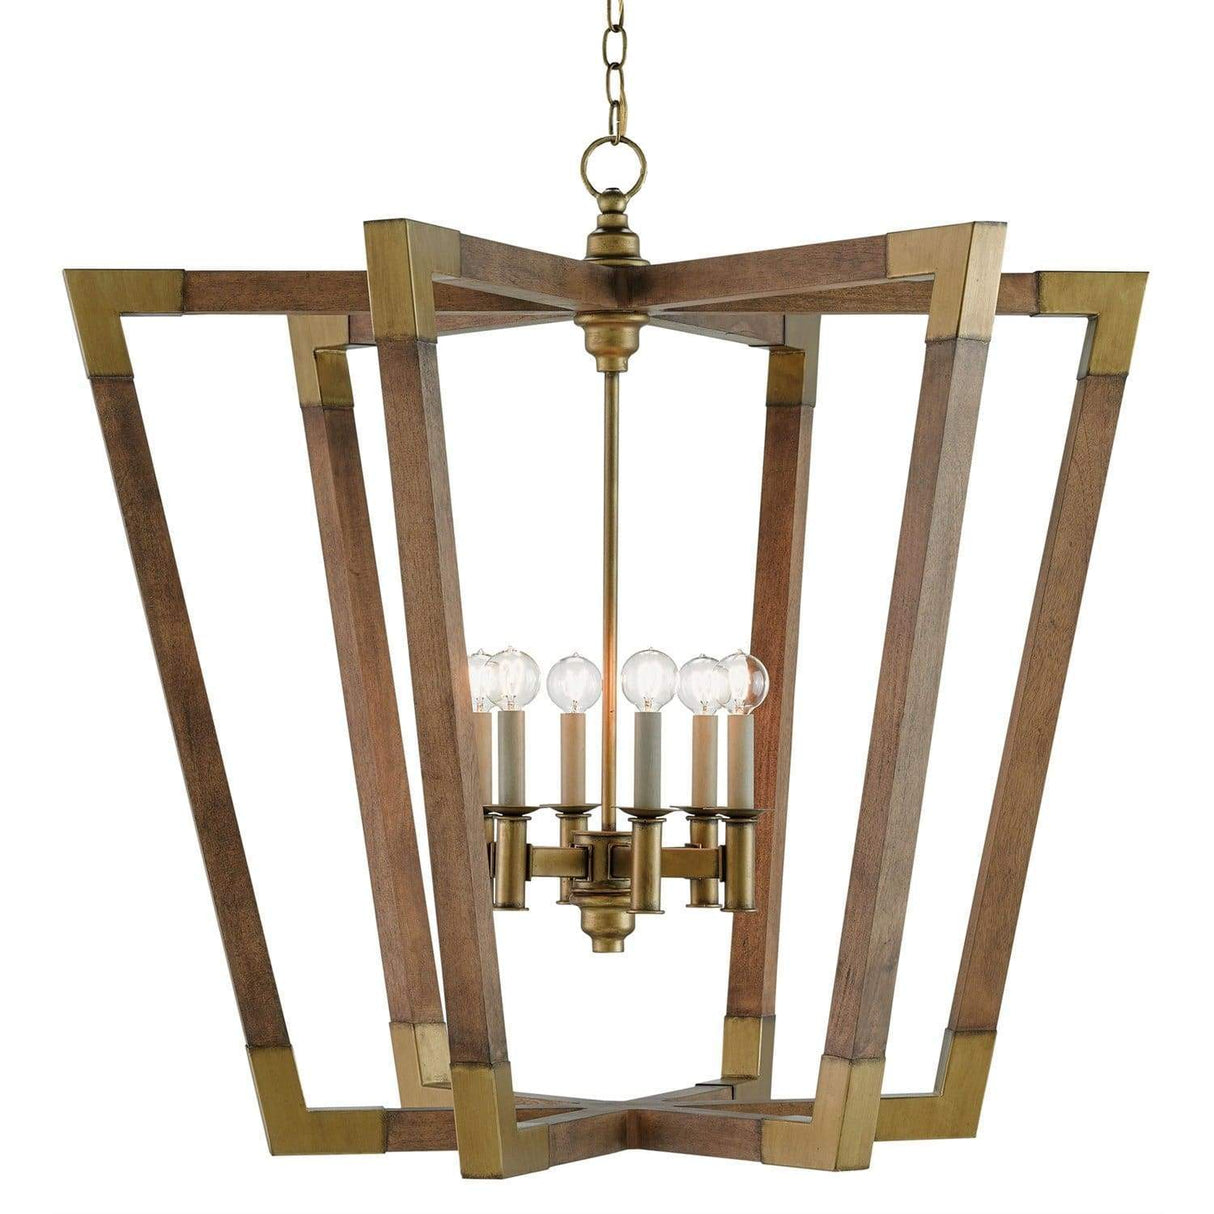 Currey and Company Bastian Chandelier Lighting Currey-Co-9000-0008